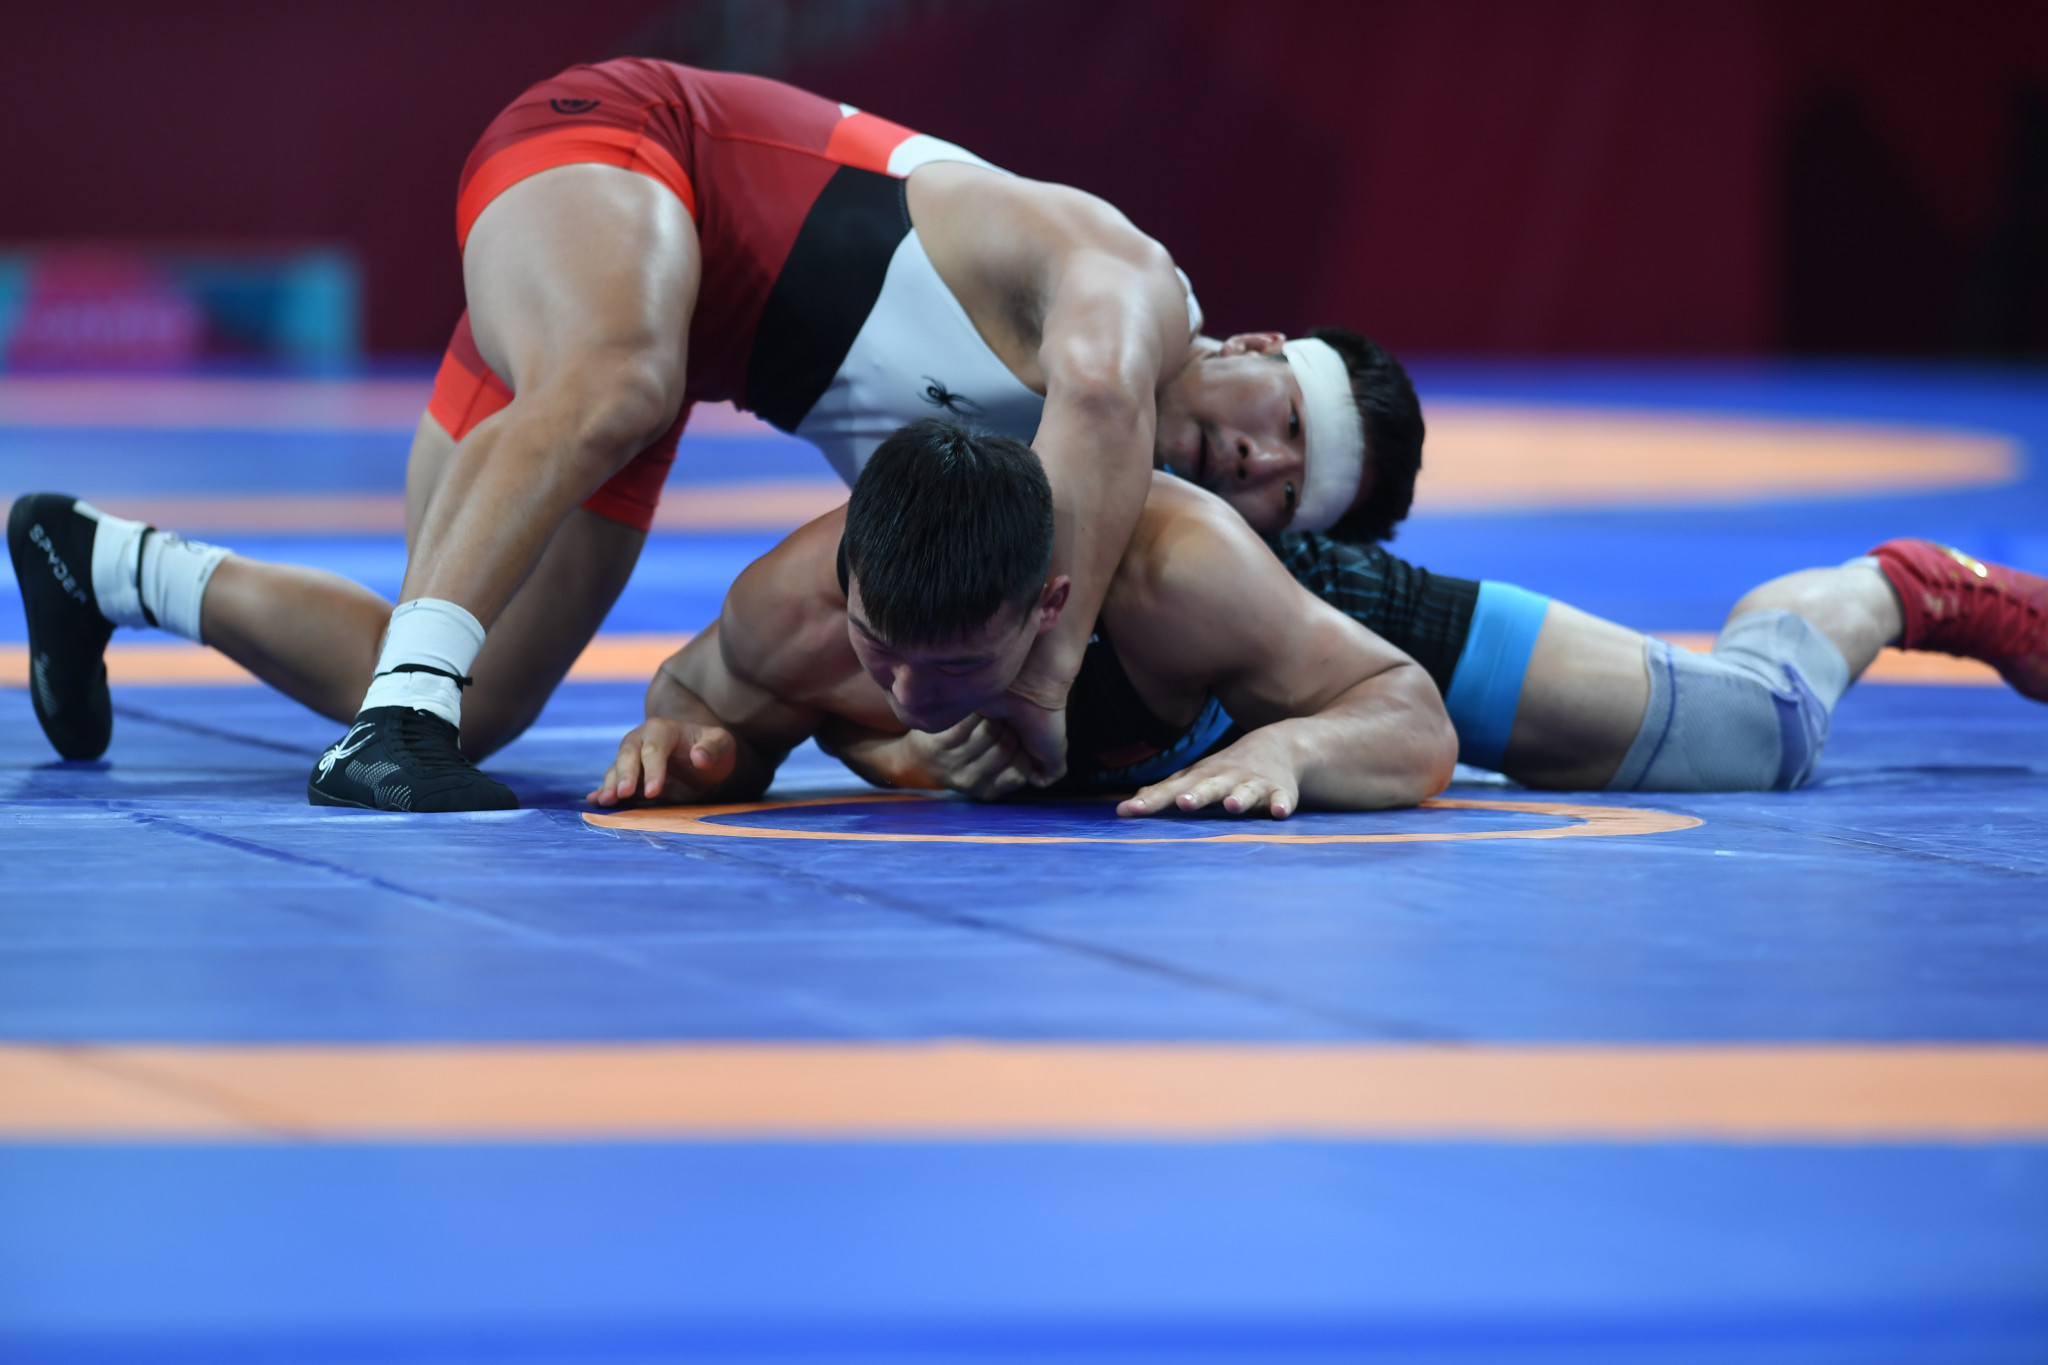 North and South Korea may send joint wrestling team to Tokyo 2020